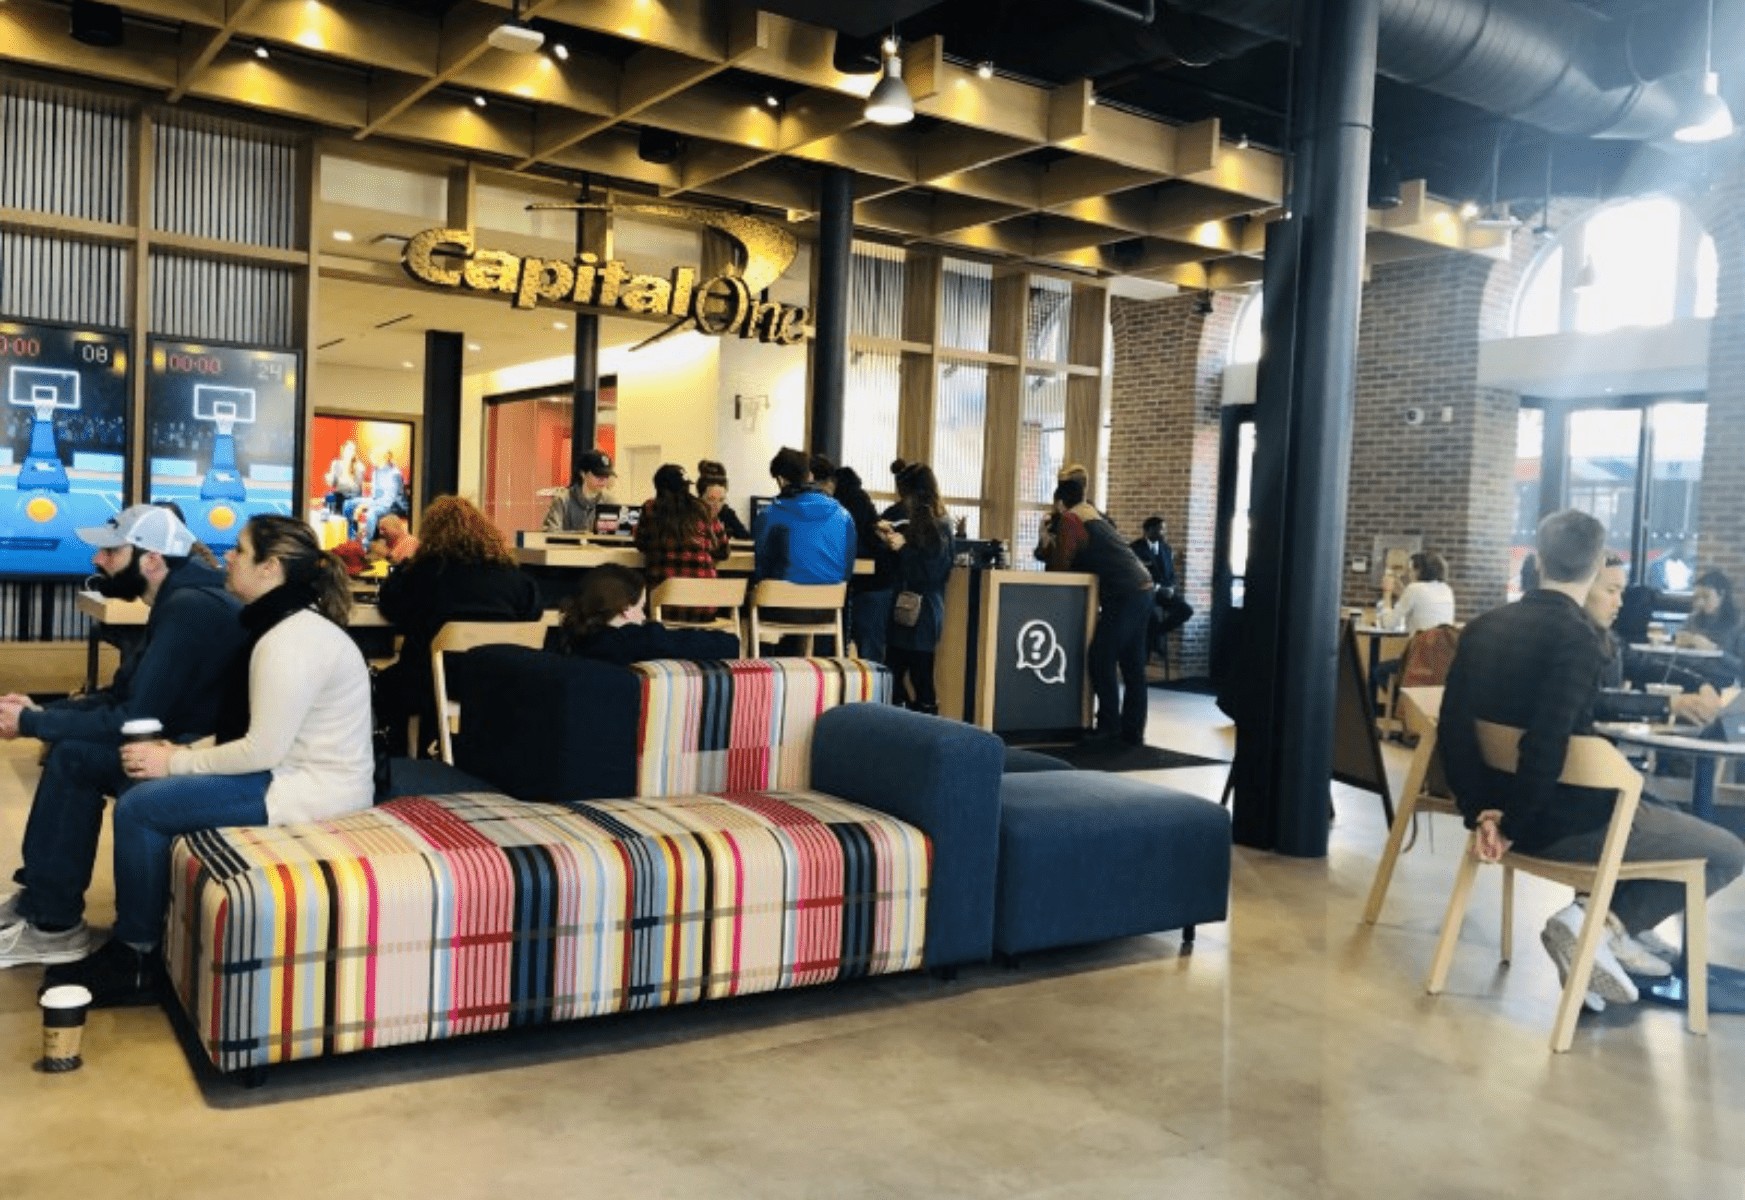 Capital One Cafe The Perfect Place to Bank and Socialize